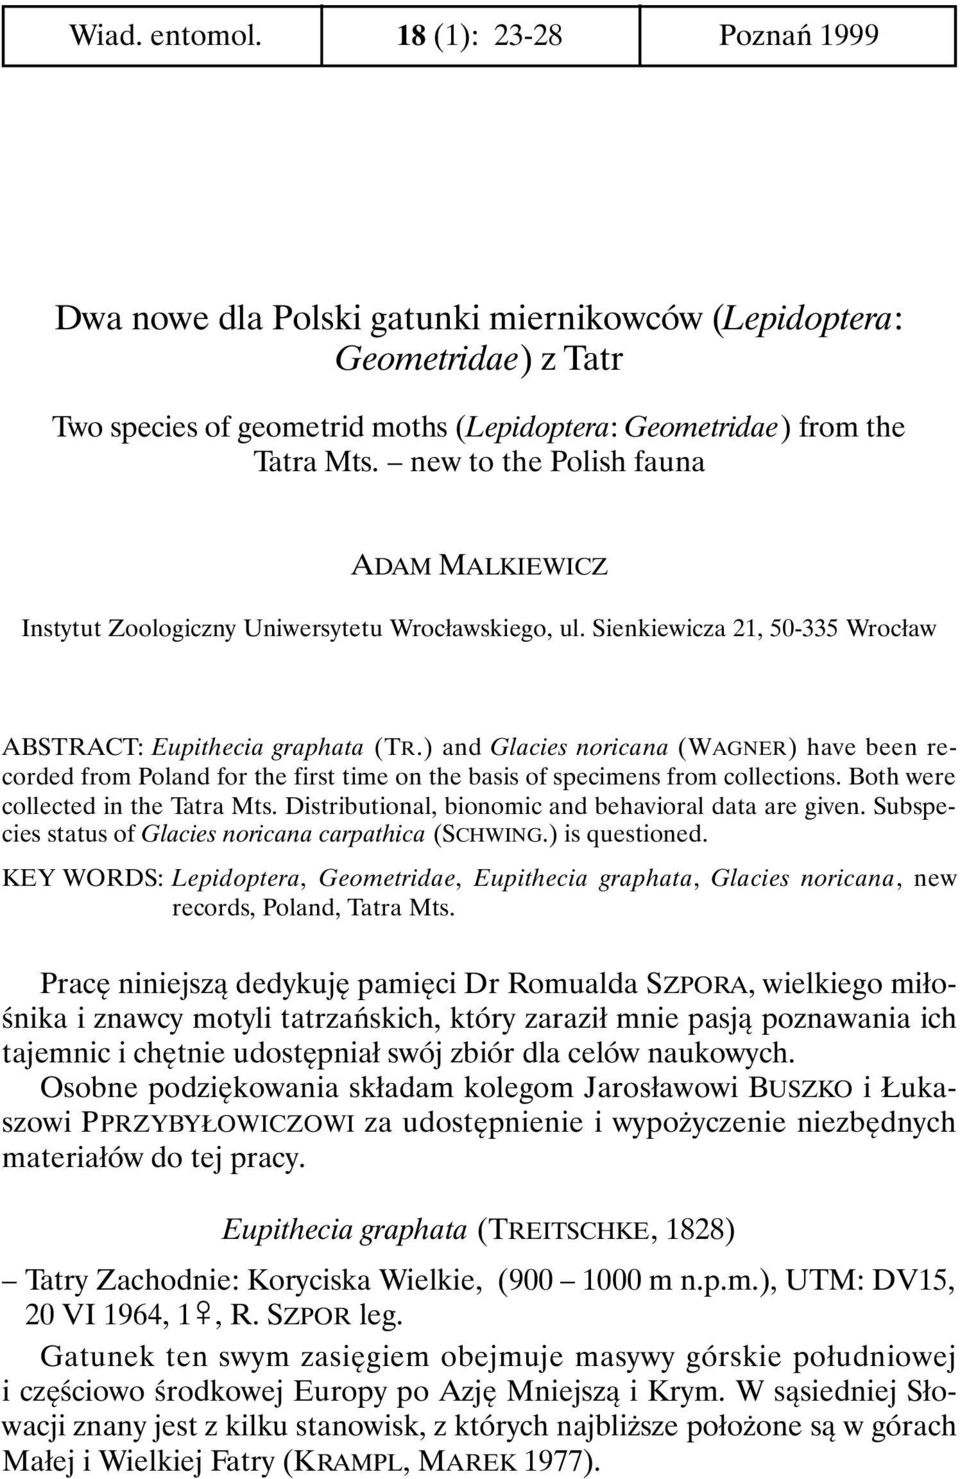 ) and Glacies noricana (WAGNER) have been recorded from Poland for the first time on the basis of specimens from collections. Both were collected in the Tatra Mts.